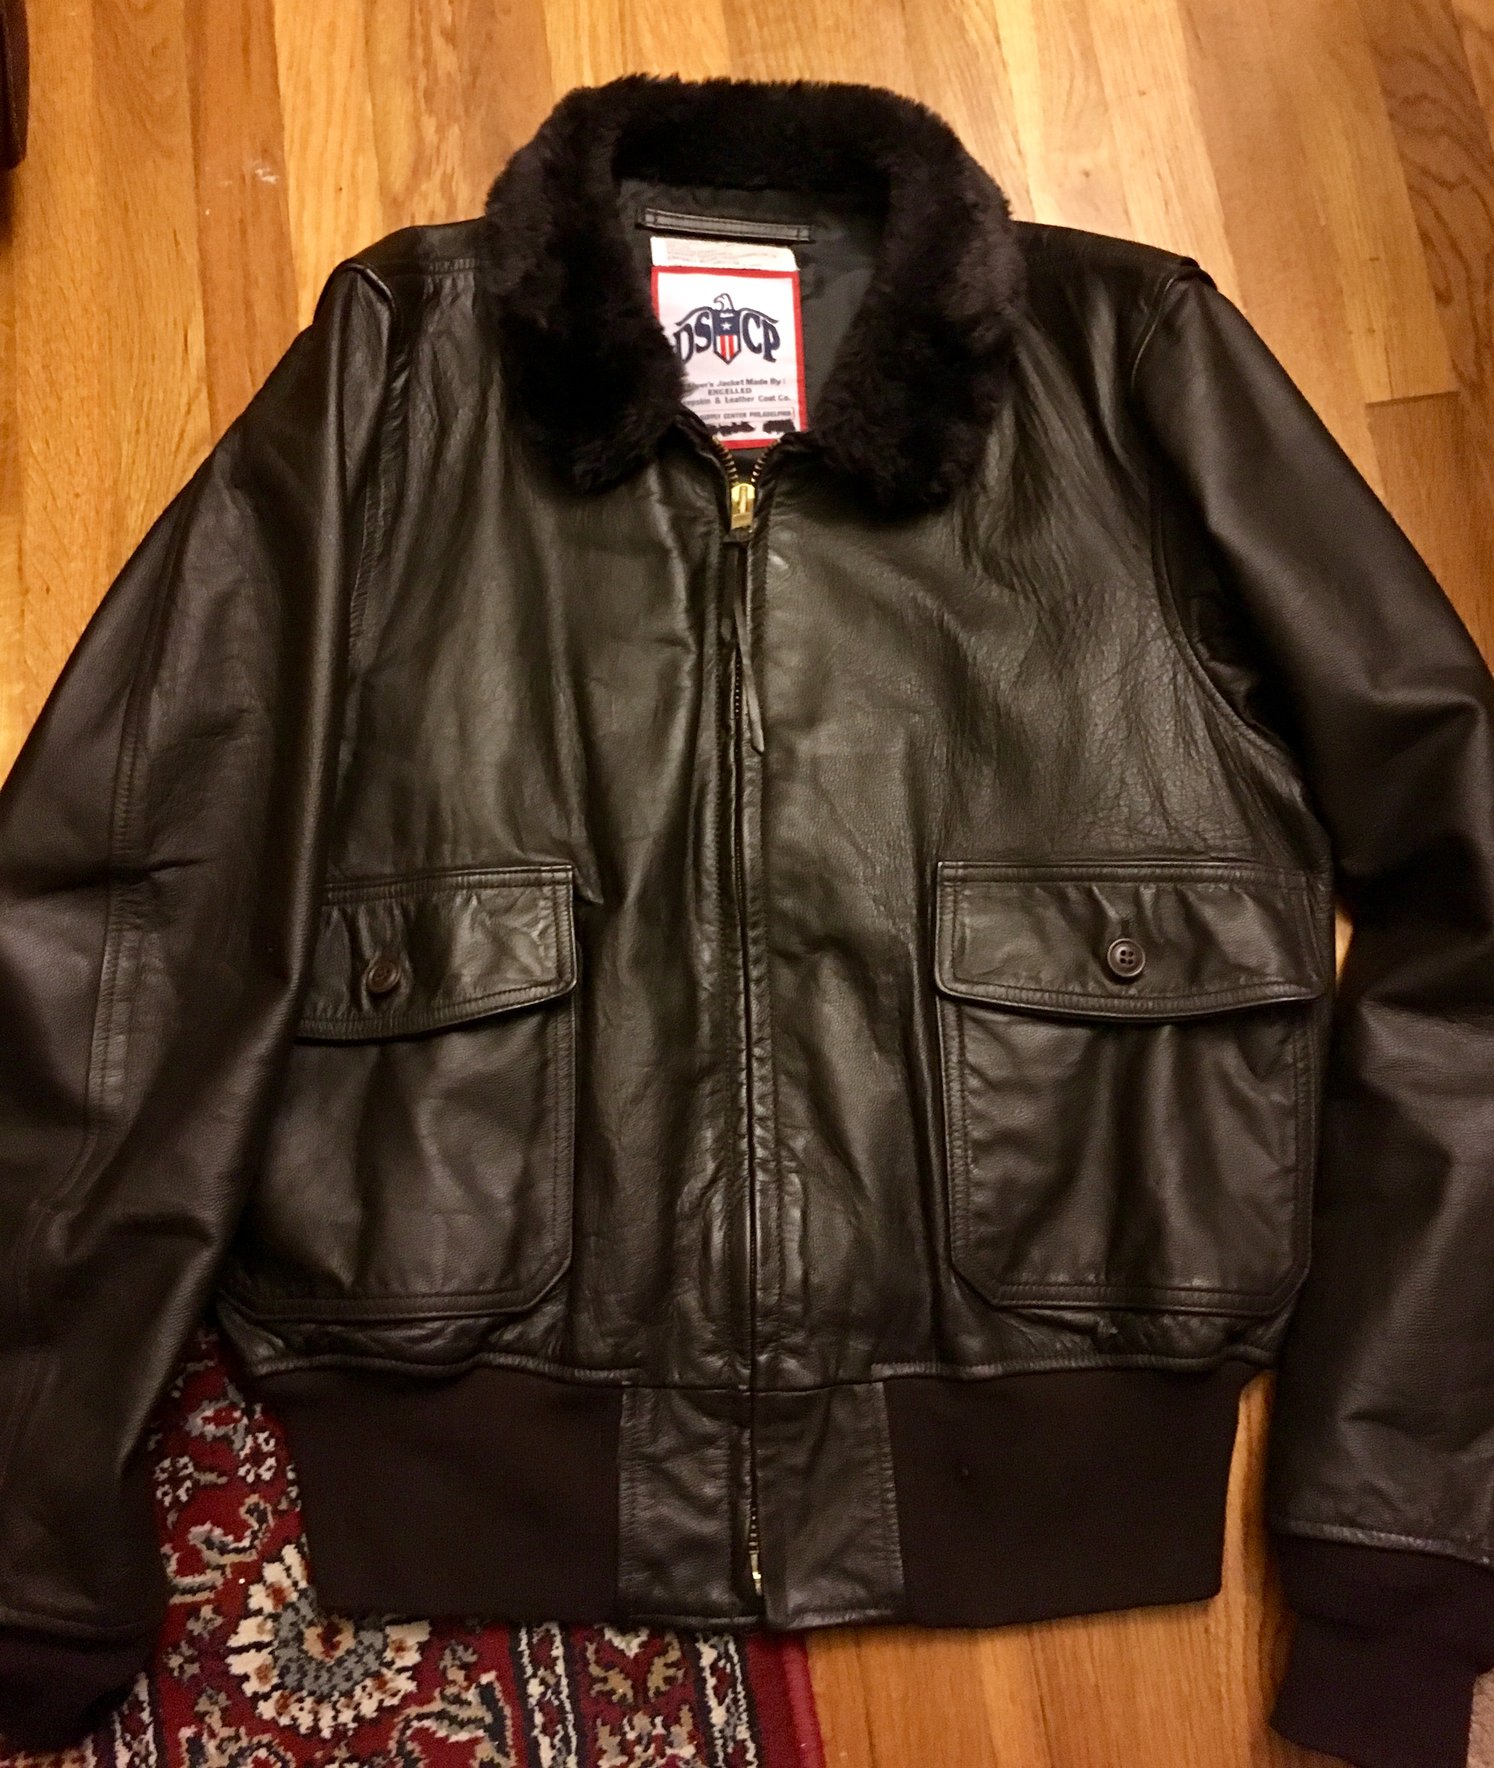 Excelled Sheepskin and Leather Company G-1 Jackets | Page 2 | The ...